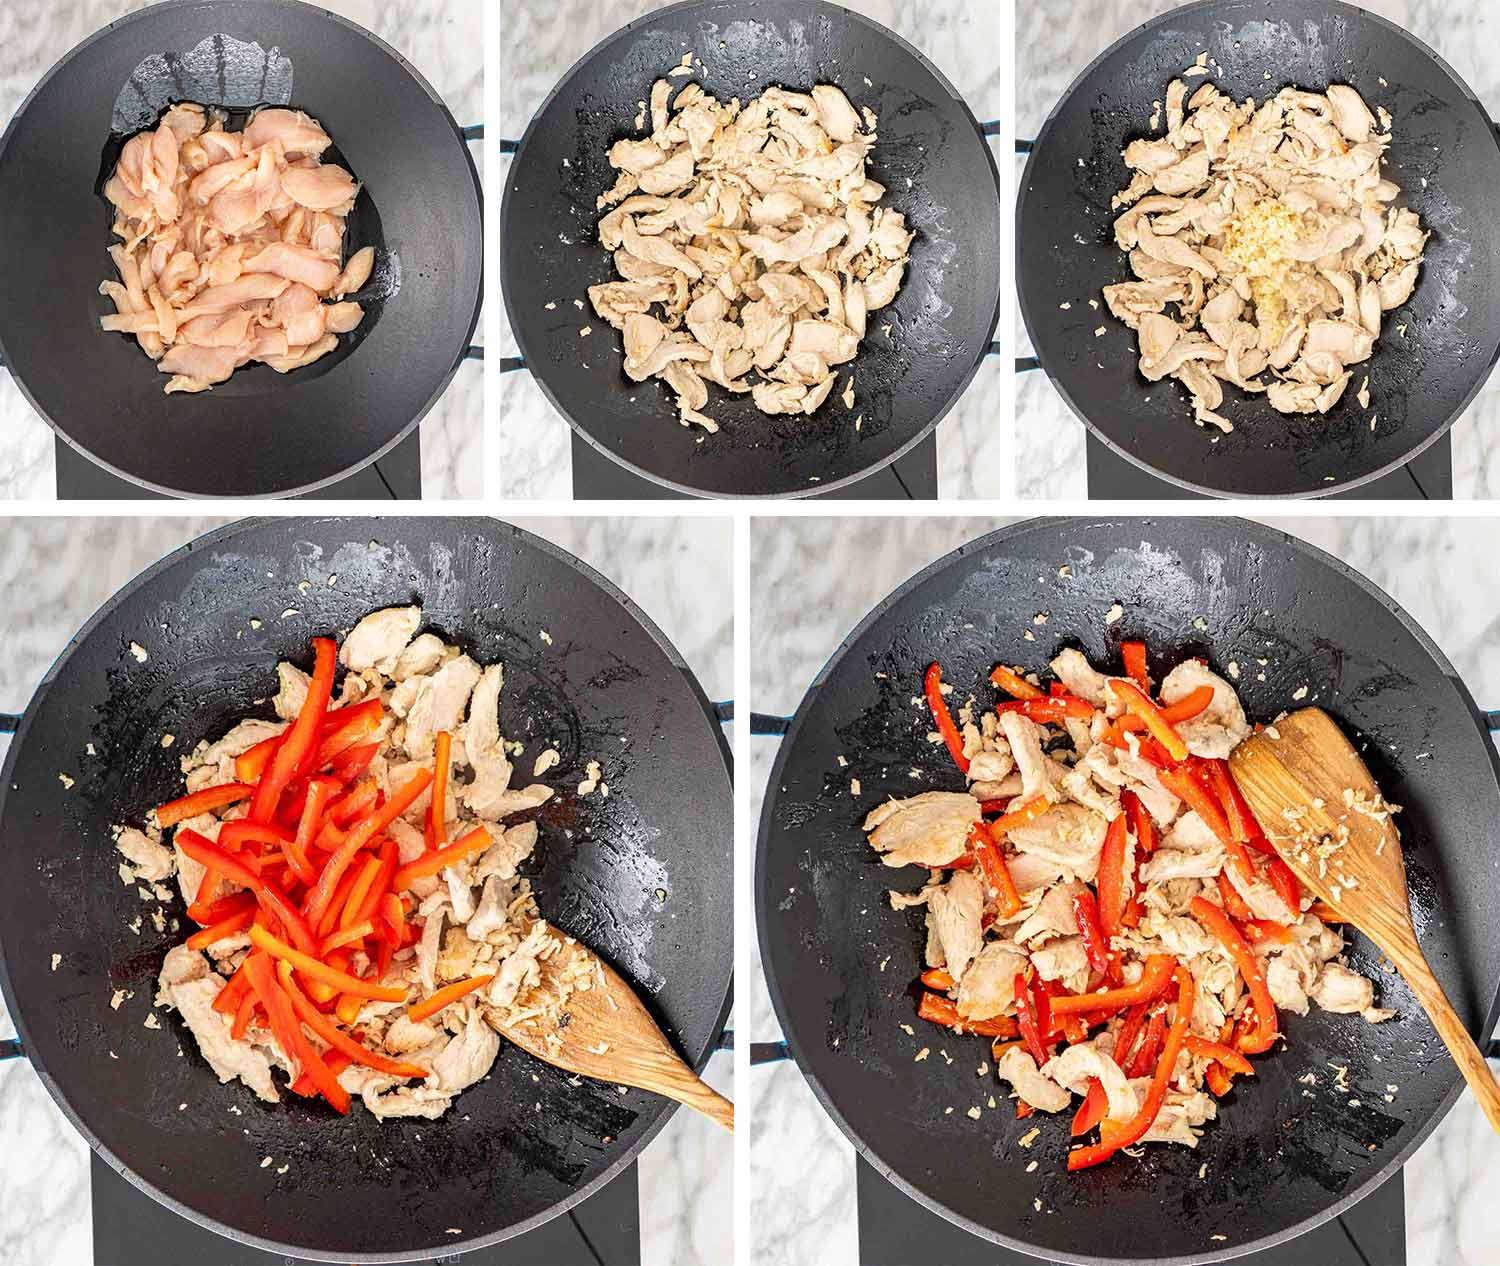 process shots showing how to make spicy peanut noodles.